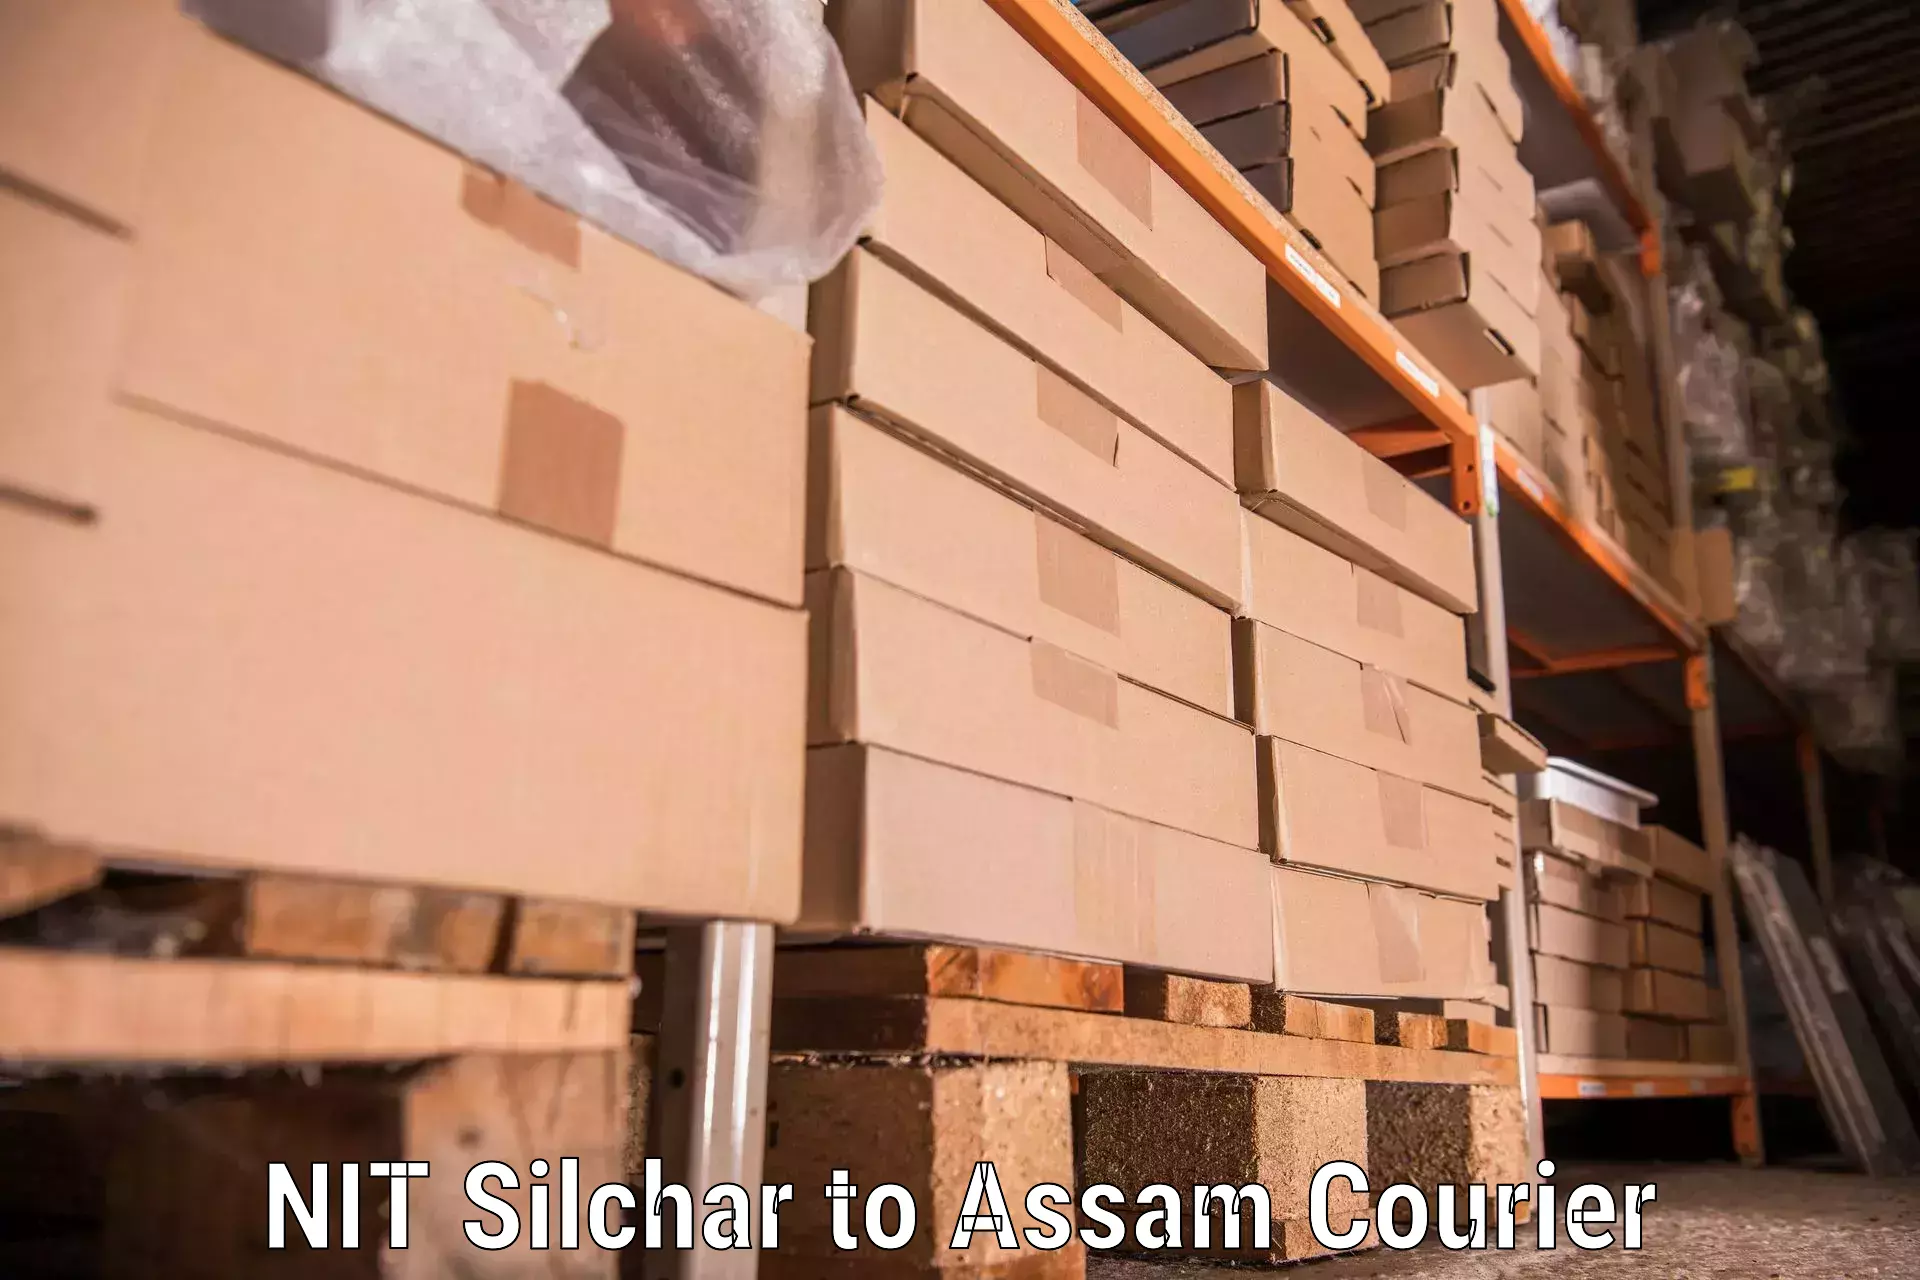 Efficient moving company NIT Silchar to Rupai Siding